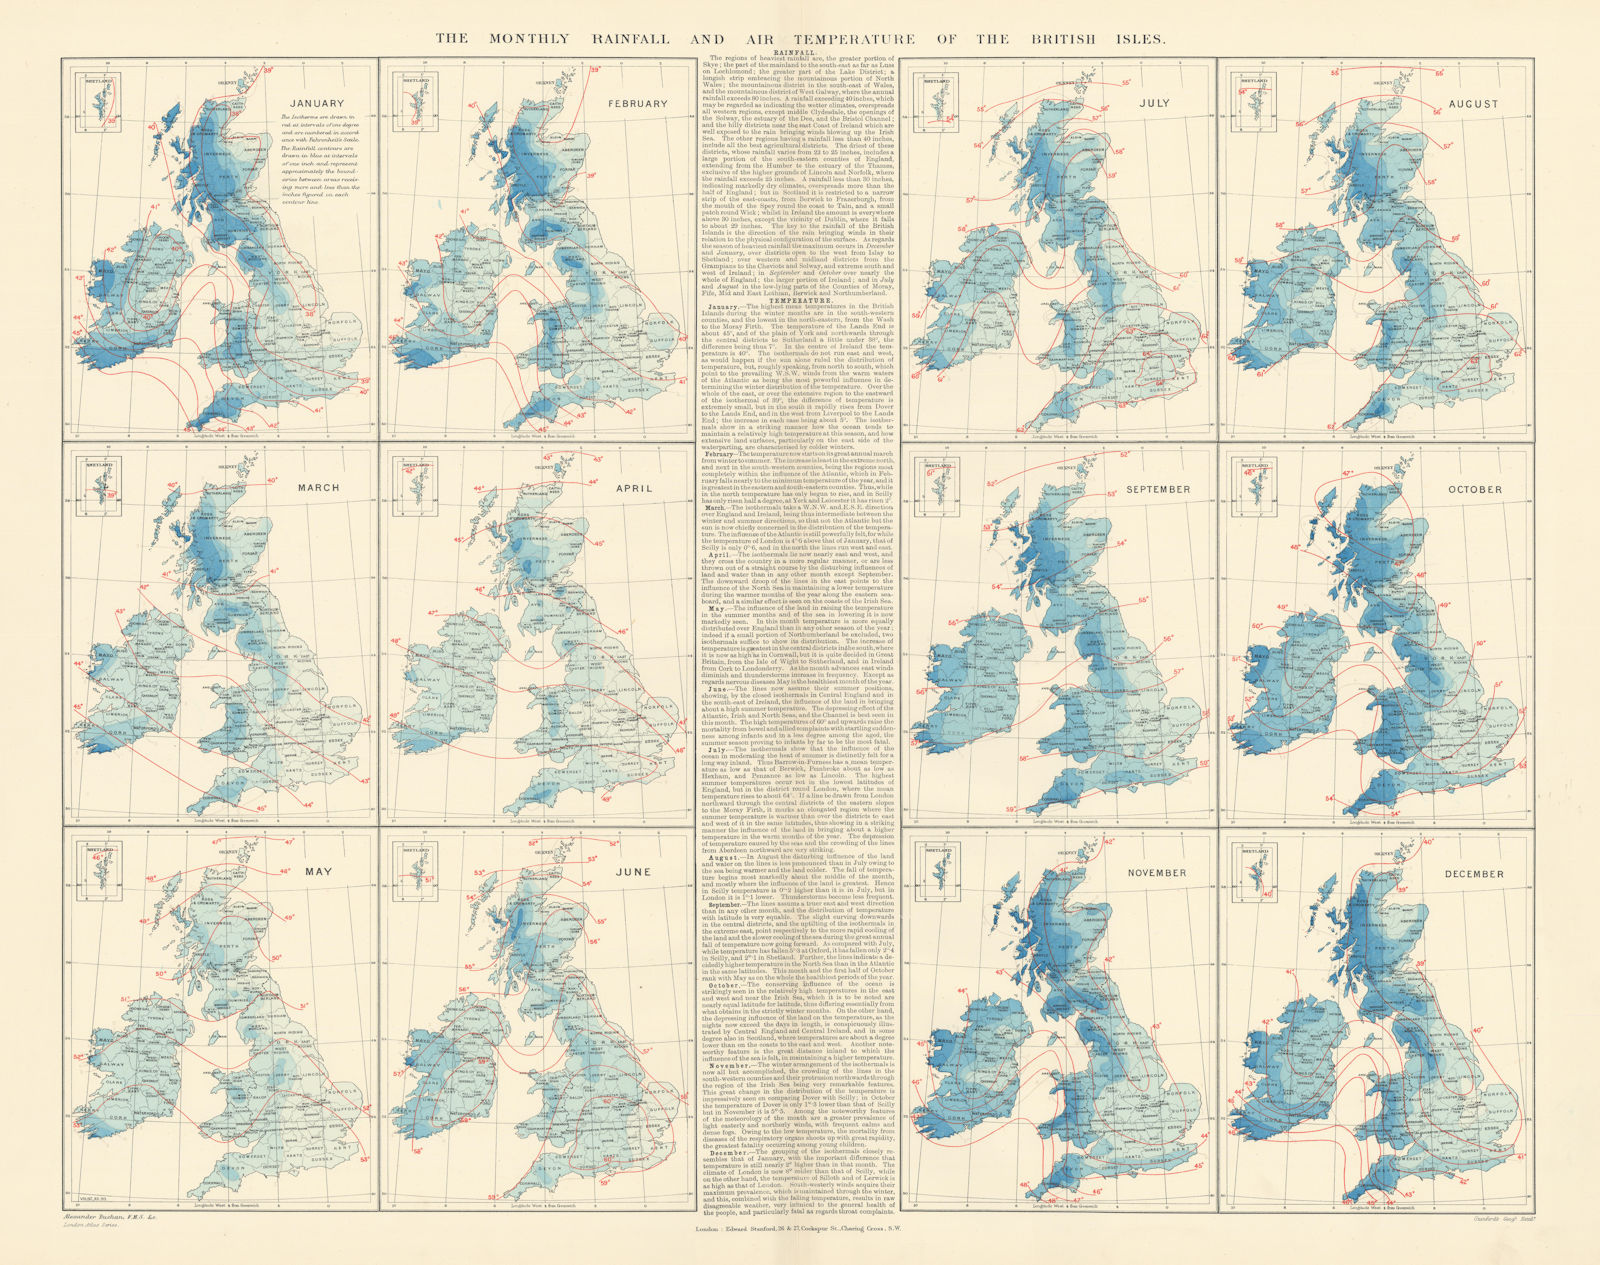 British Isles. Monthly rainfall & air temperature. 61x55cm. STANFORD 1896 map